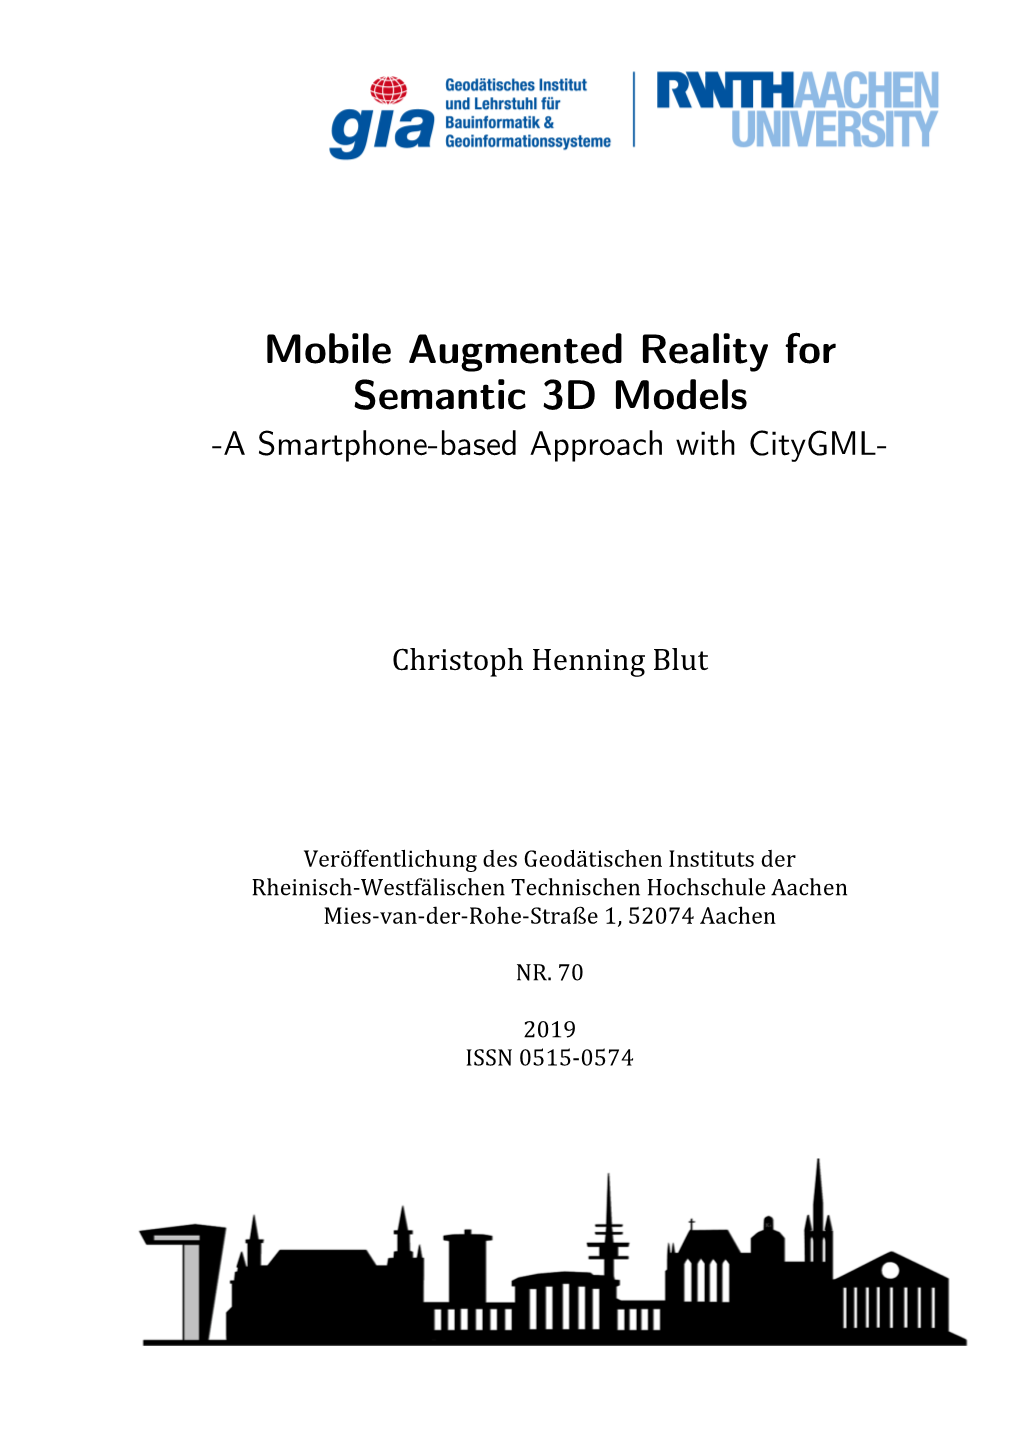 Mobile Augmented Reality for Semantic 3D Models -A Smartphone-Based Approach with Citygml